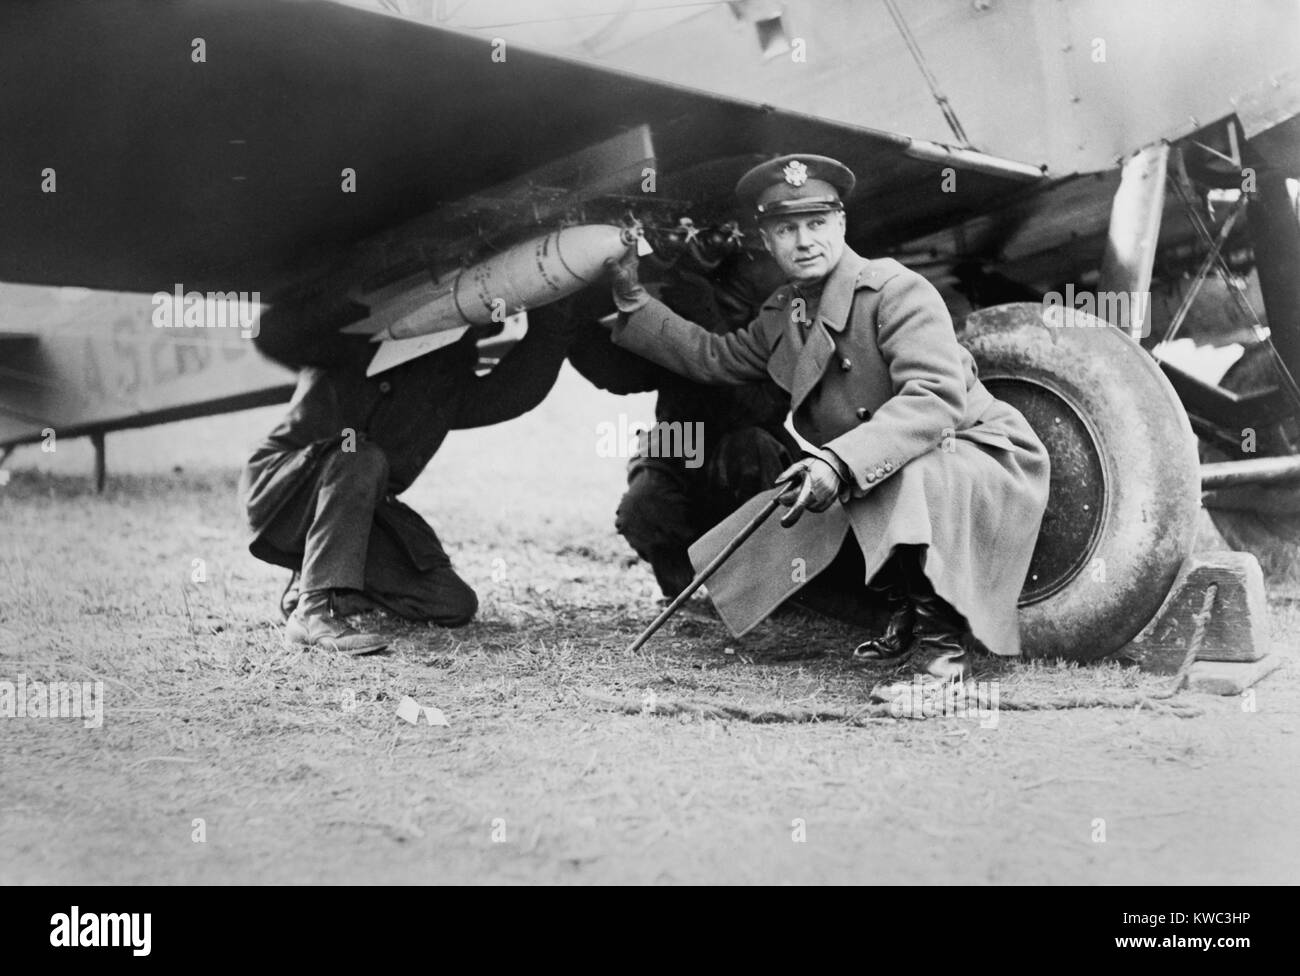 Brigadier General Billy Mitchell and another man, attaching a bomb under wing of airplane. Ca. 1925. He advocated military aviation and foresaw the vulnerability of ships to aerial bombing. His fervor resulted in a court-martial for insubordination and his resignation. (BSLOC 2015 14 111) Stock Photo